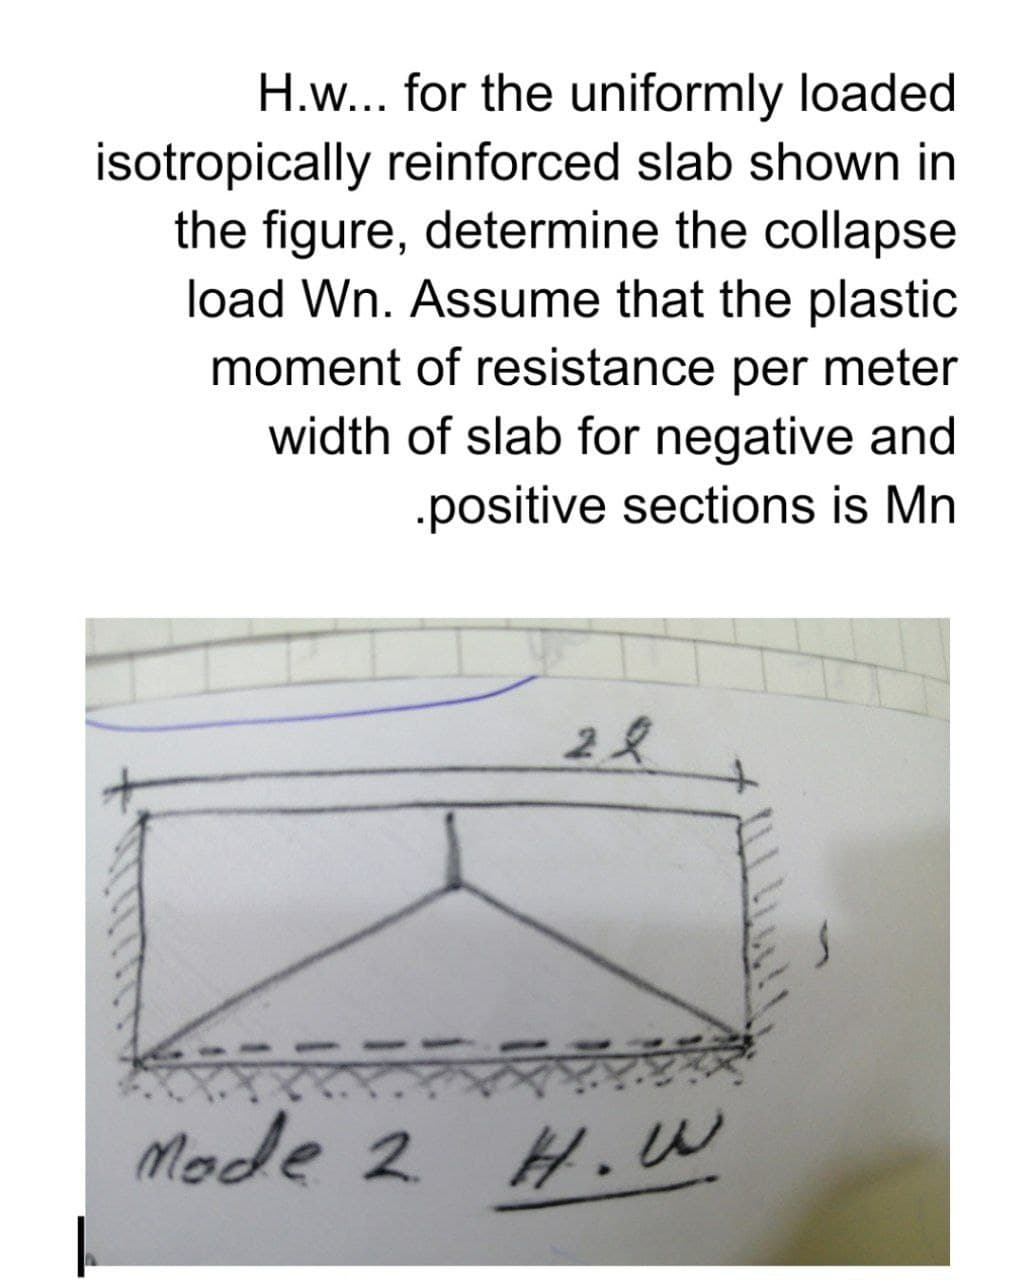 H.w... for the uniformly loaded
isotropically reinforced slab shown in
the figure, determine the collapse
load Wn. Assume that the plastic
moment of resistance per meter
width of slab for negative and
.positive sections is Mn
28
Mode 2 H. W